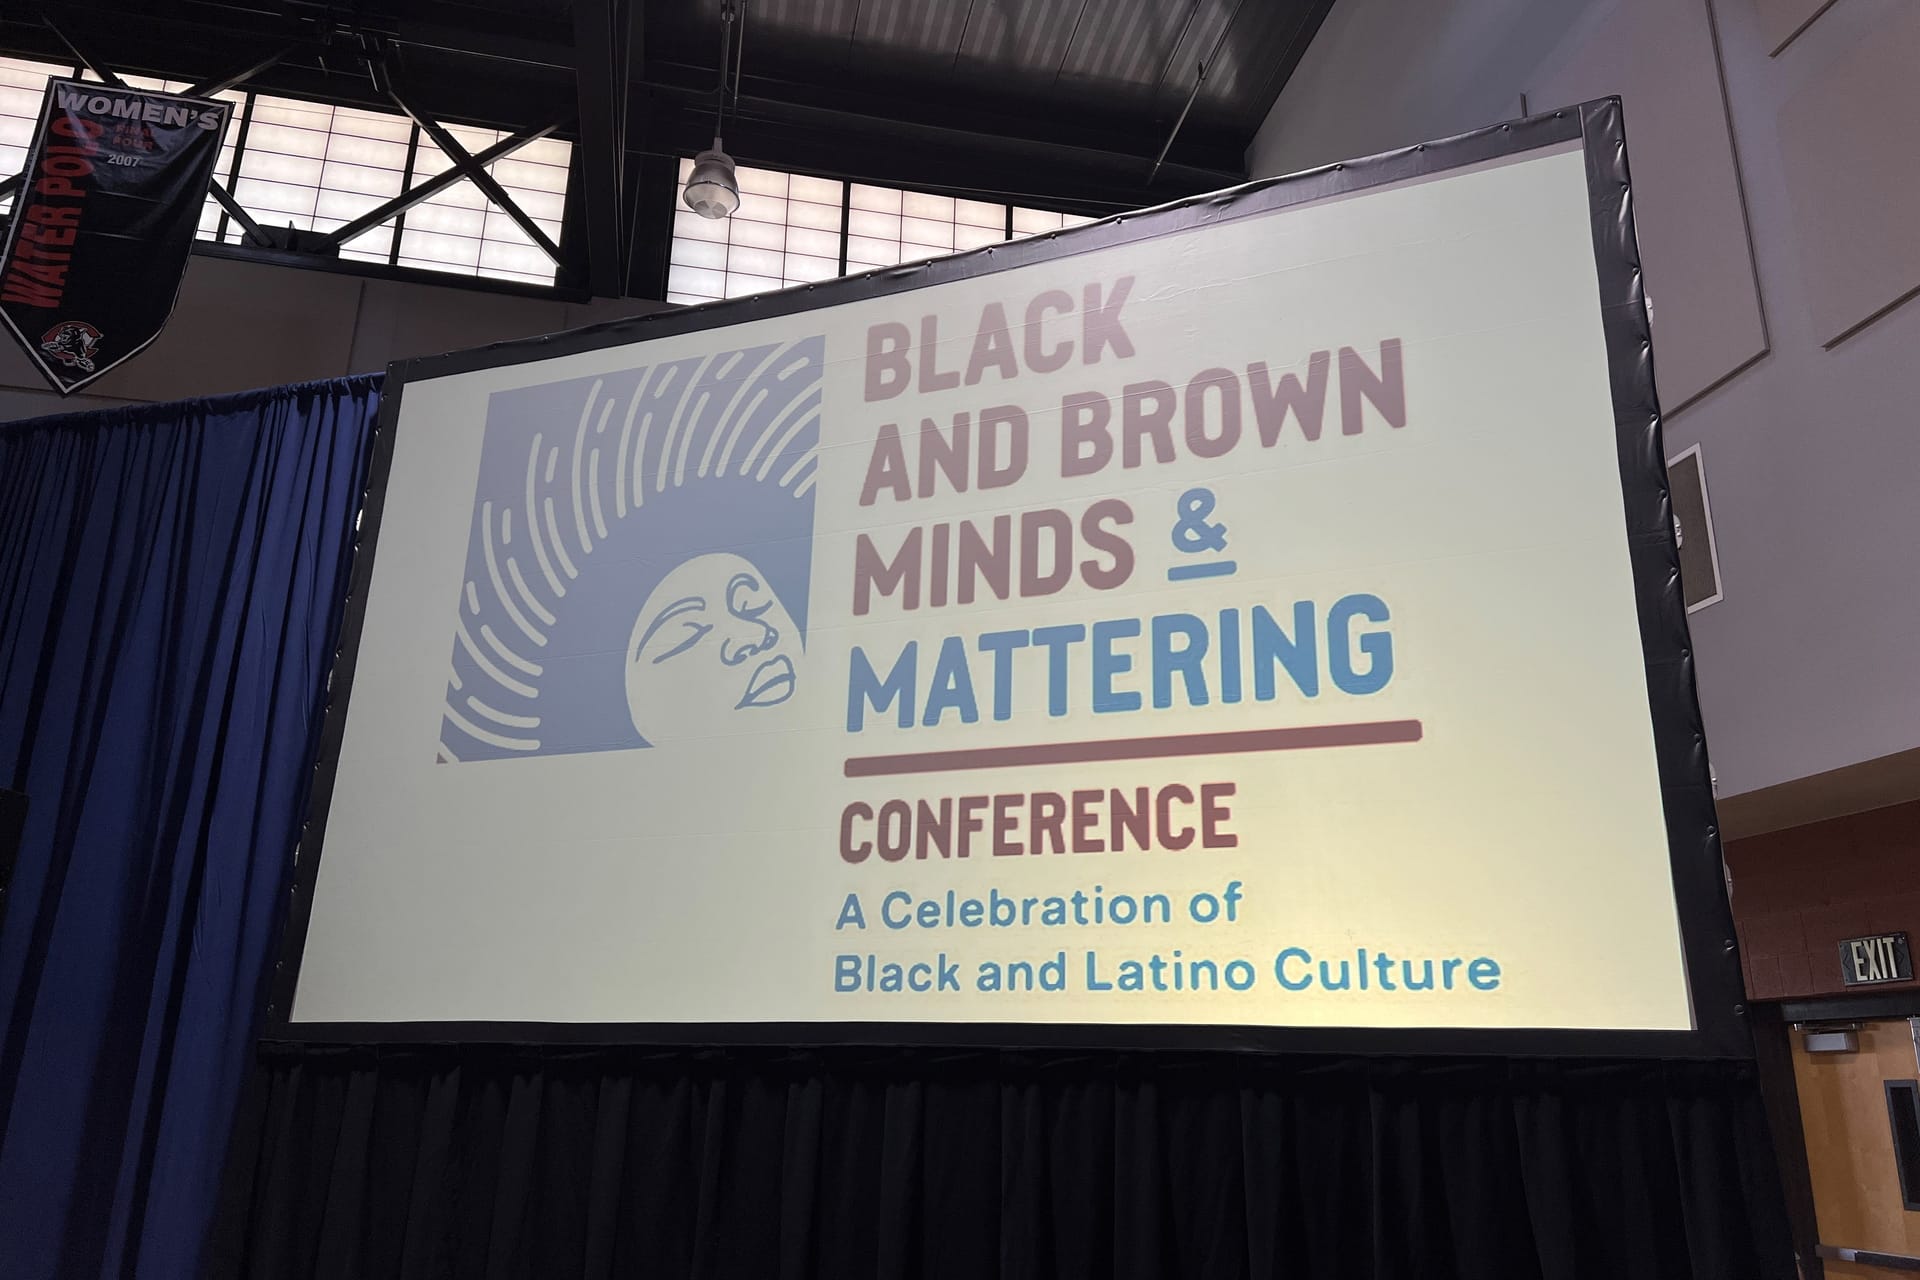 Black and Brown Minds & Mattering Conference poster